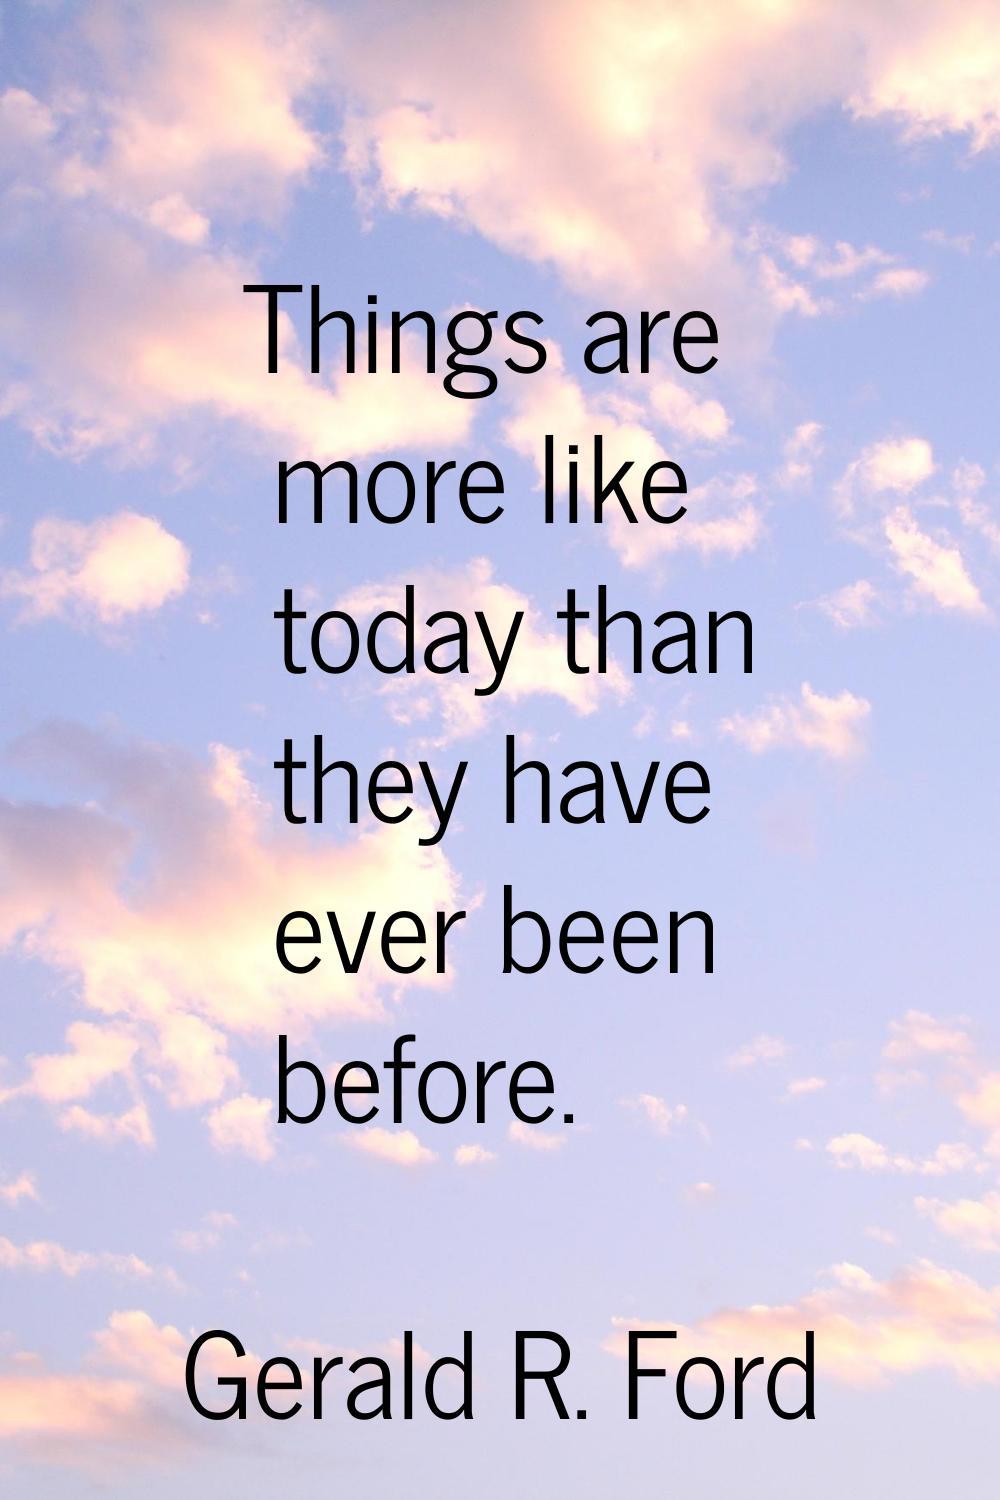 Things are more like today than they have ever been before.